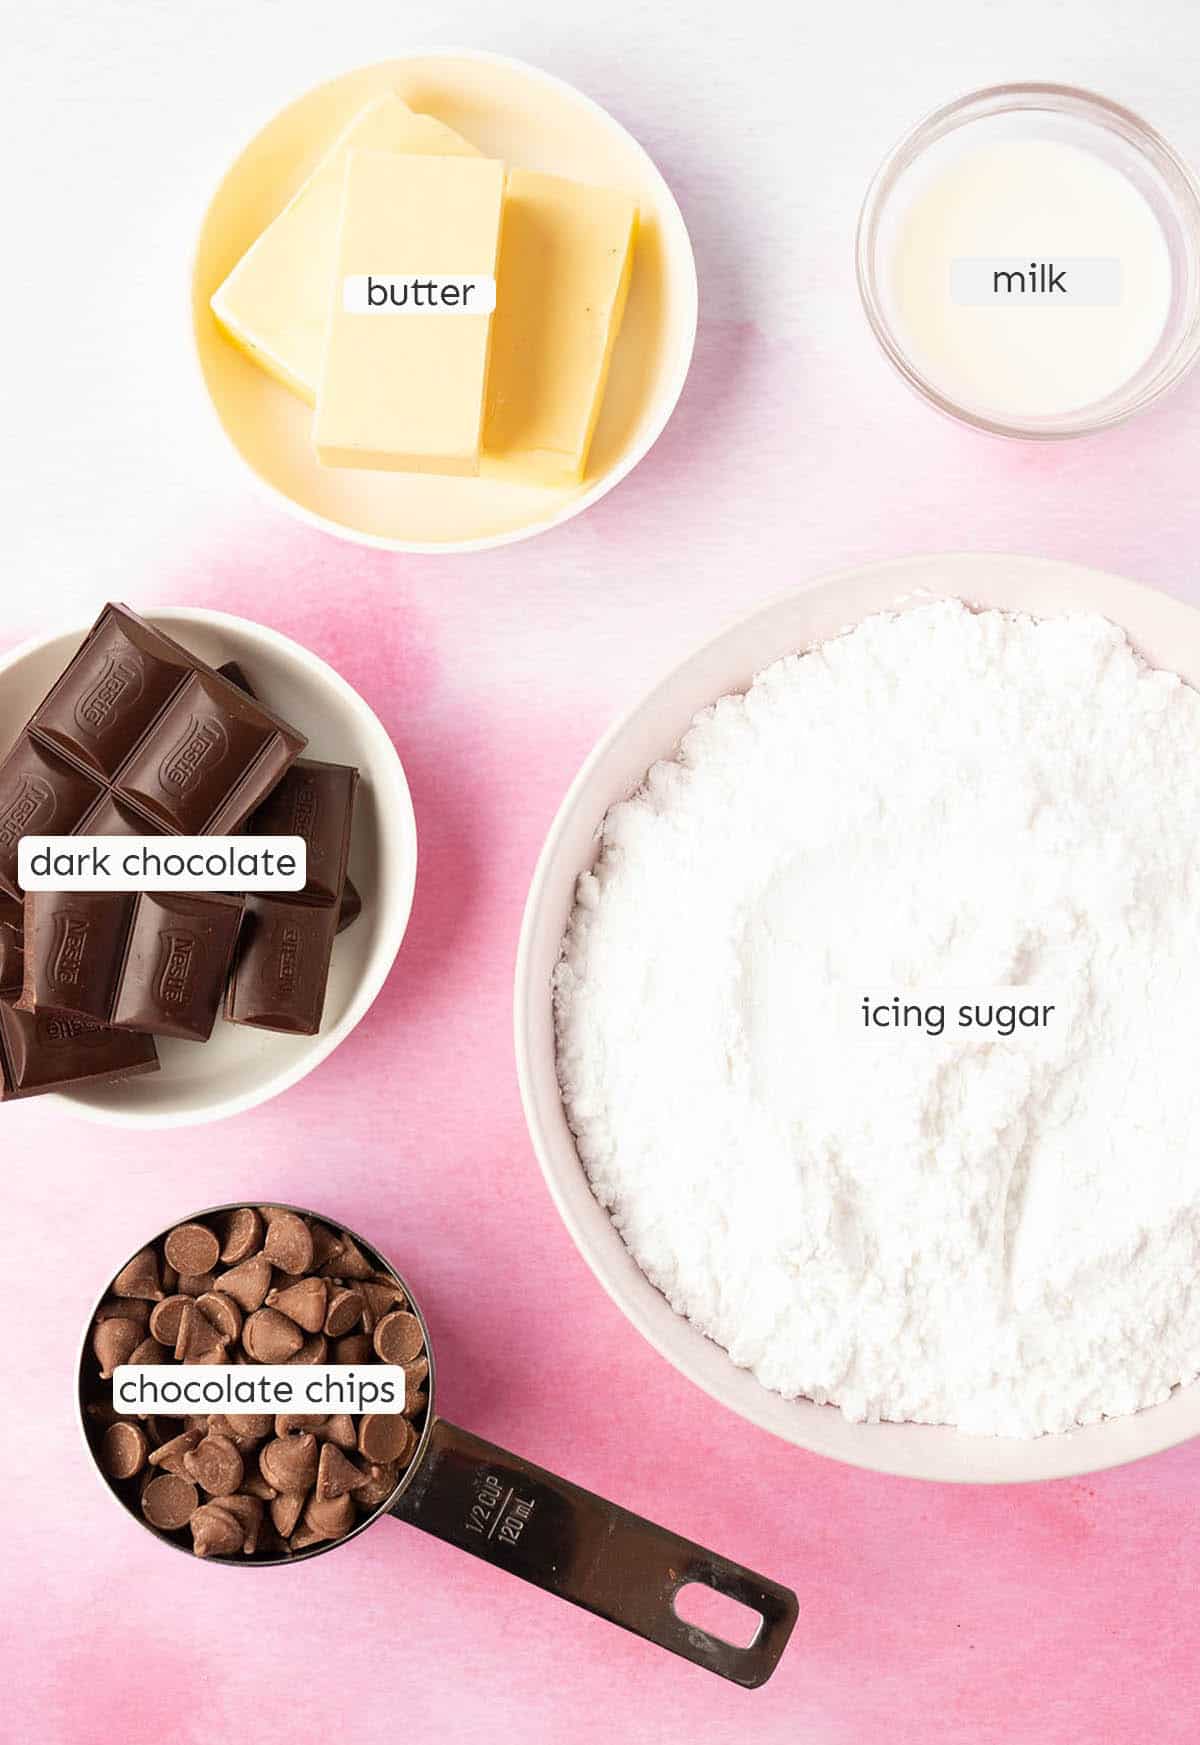 All the ingredients needed to make Chocolate Buttercream from scratch.